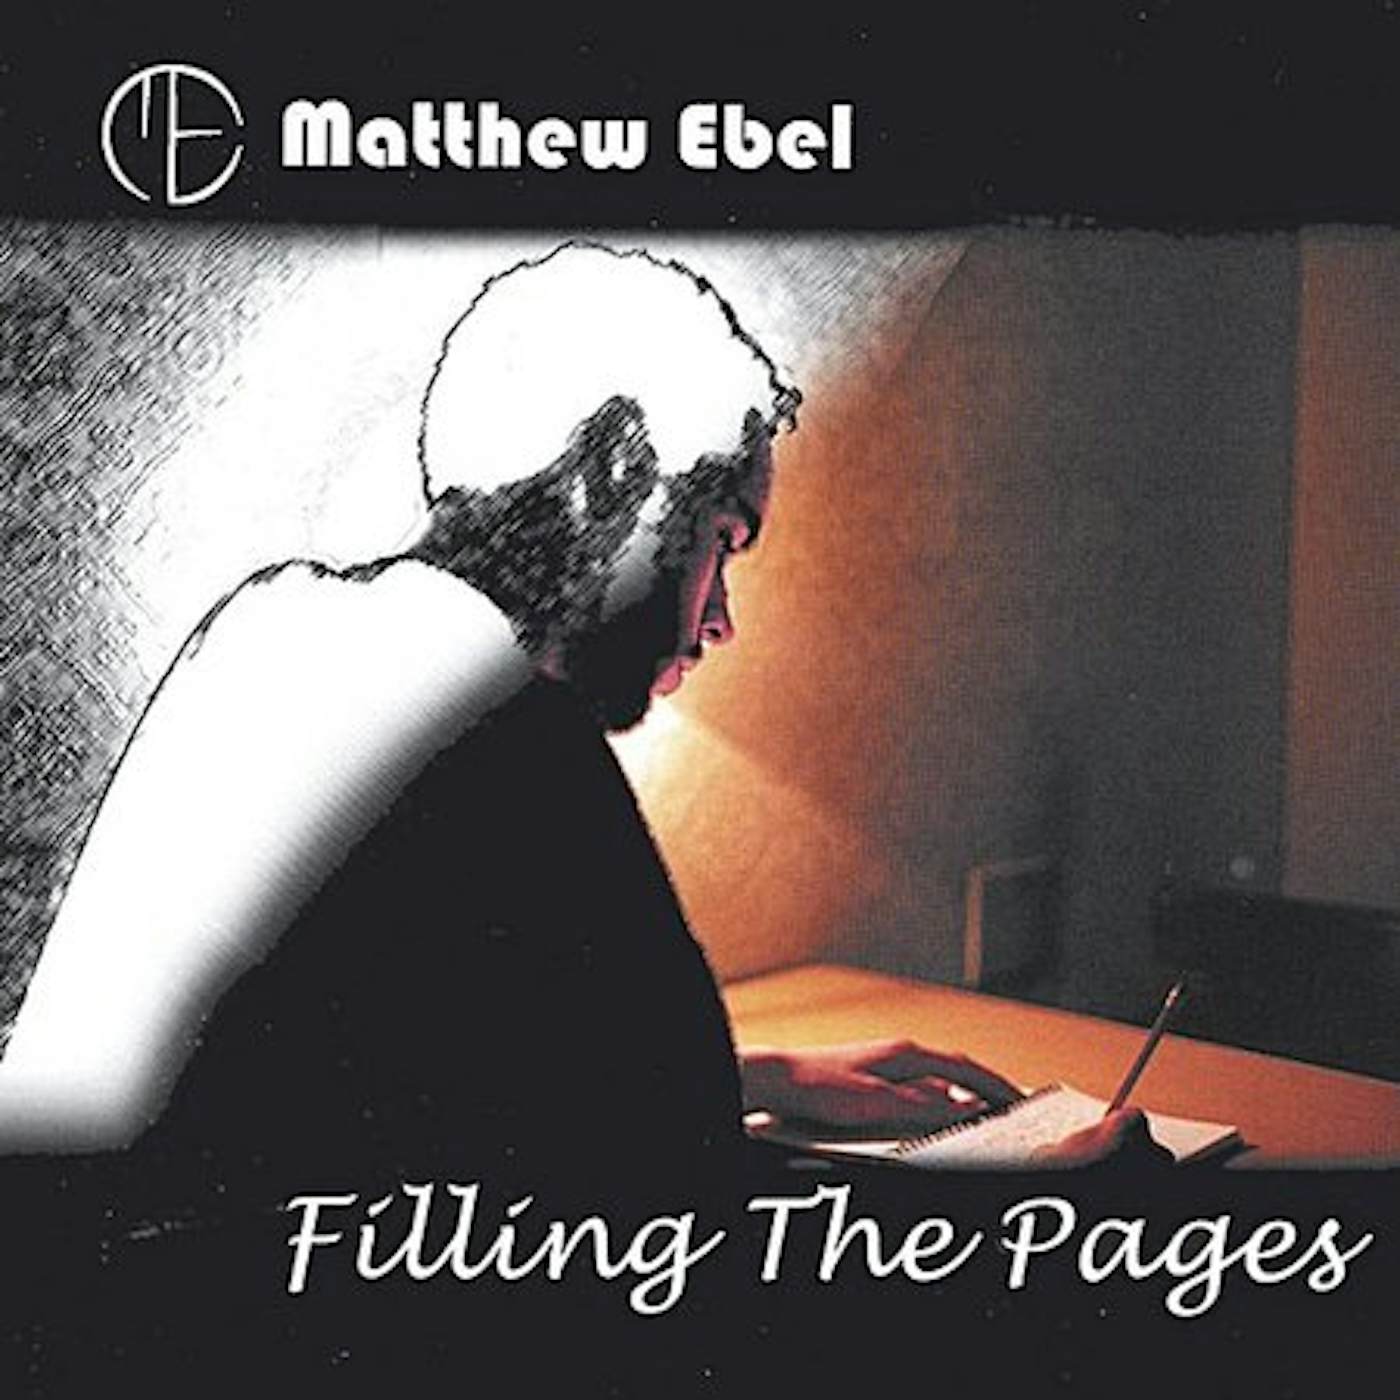 Matthew Ebel FILLING THE PAGES CD